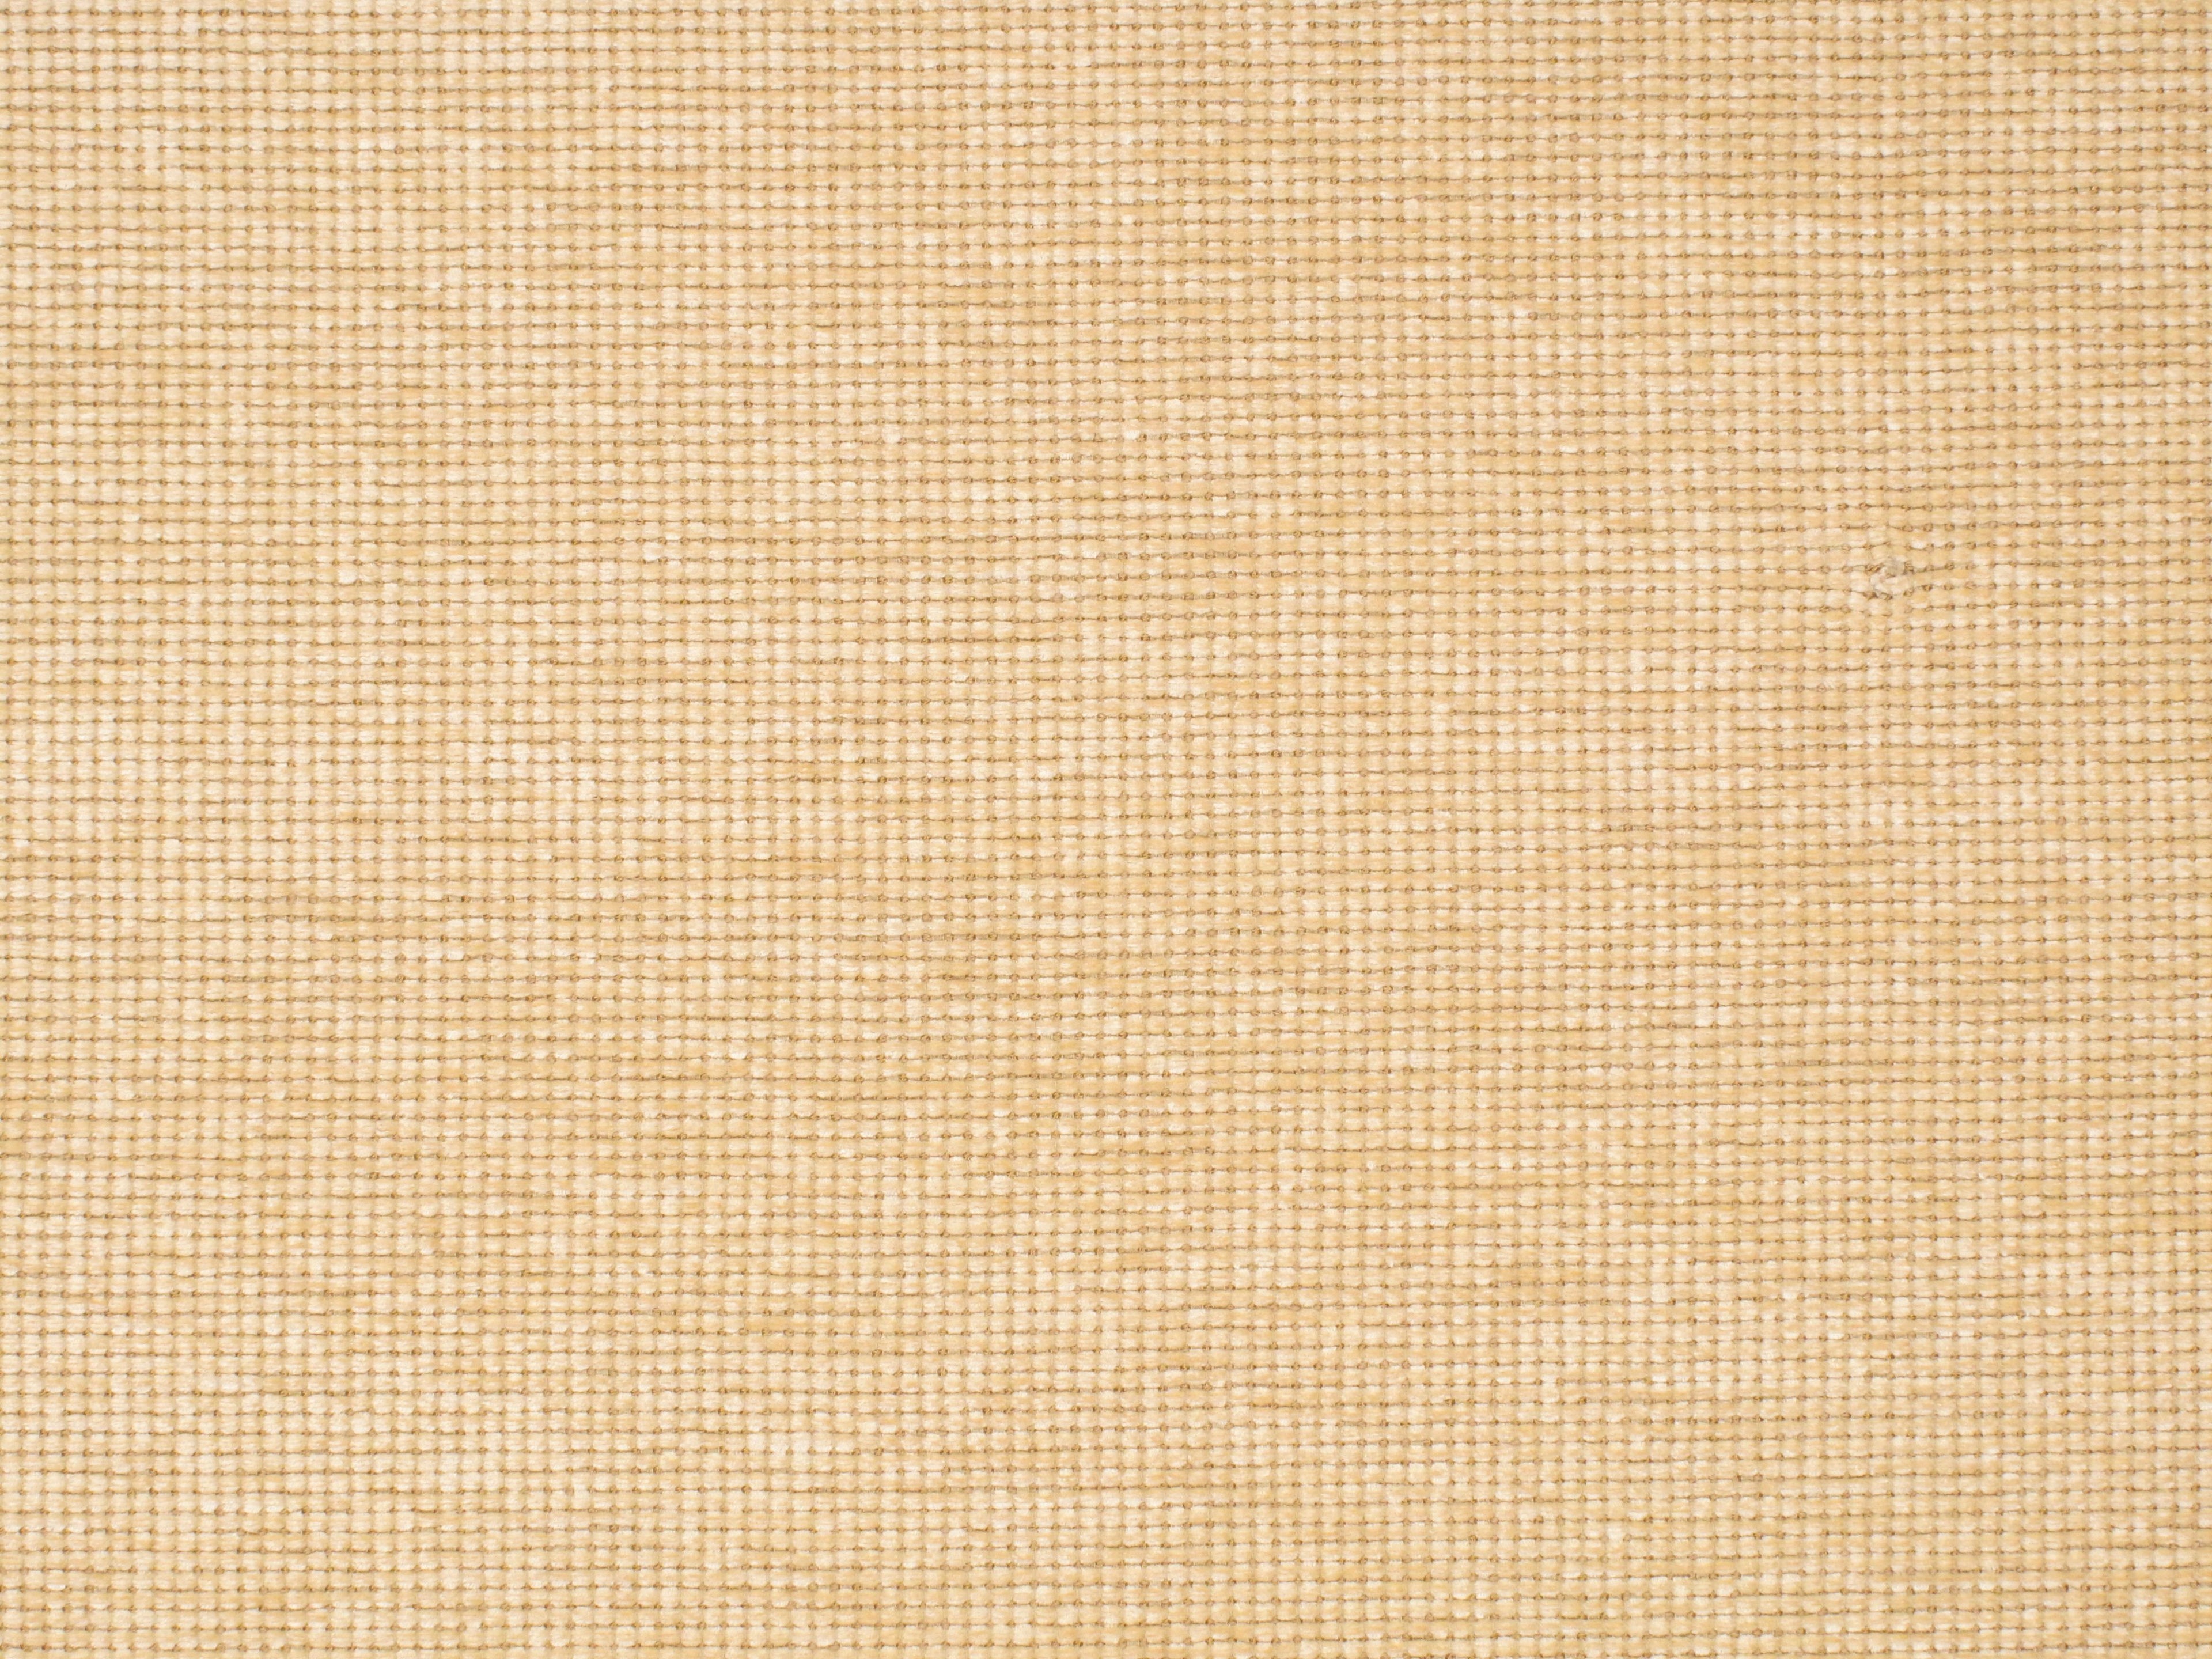 Cubic fabric in wheat color - pattern number PW 00070093 - by Scalamandre in the Old World Weavers collection